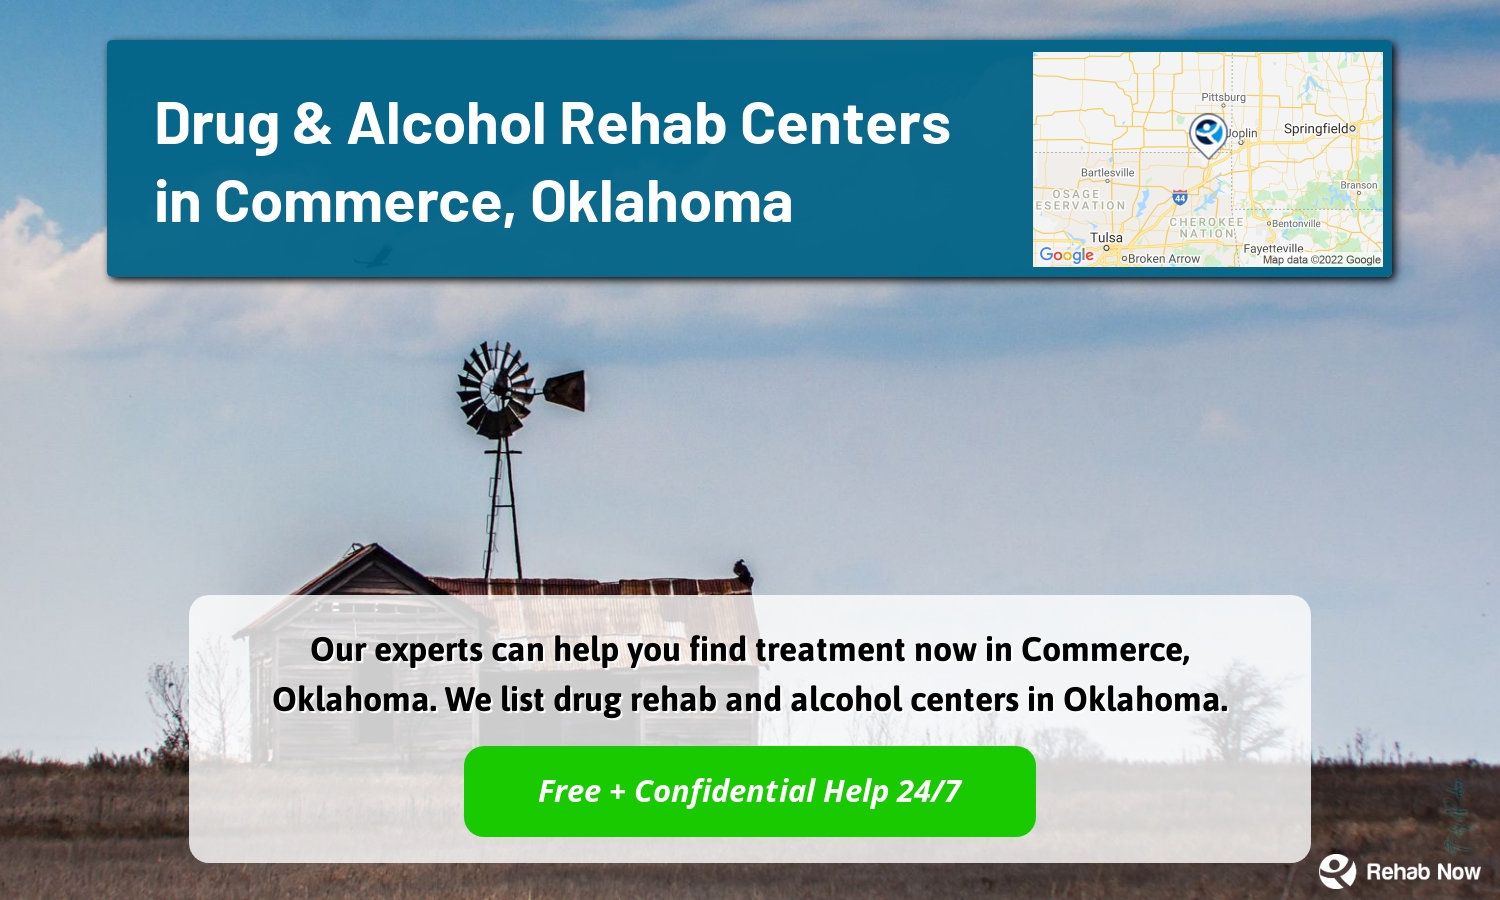 Our experts can help you find treatment now in Commerce, Oklahoma. We list drug rehab and alcohol centers in Oklahoma.